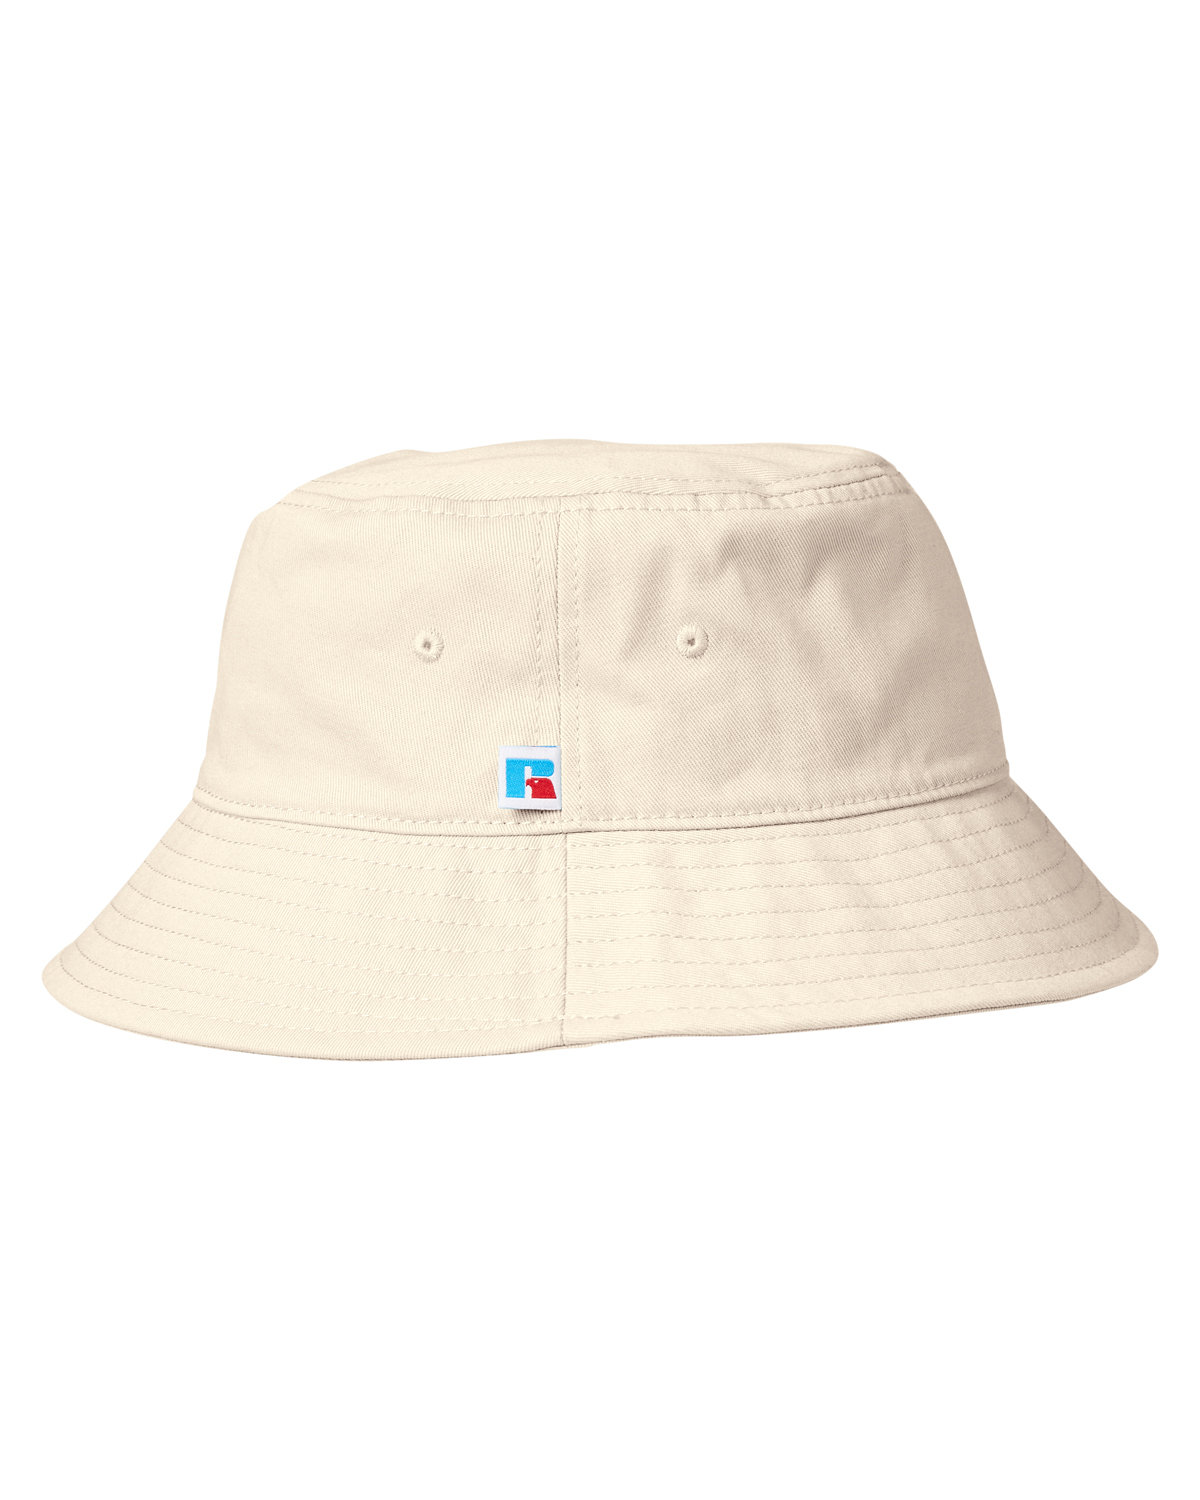 Russell Athletic Core Bucket Hat | alphabroder